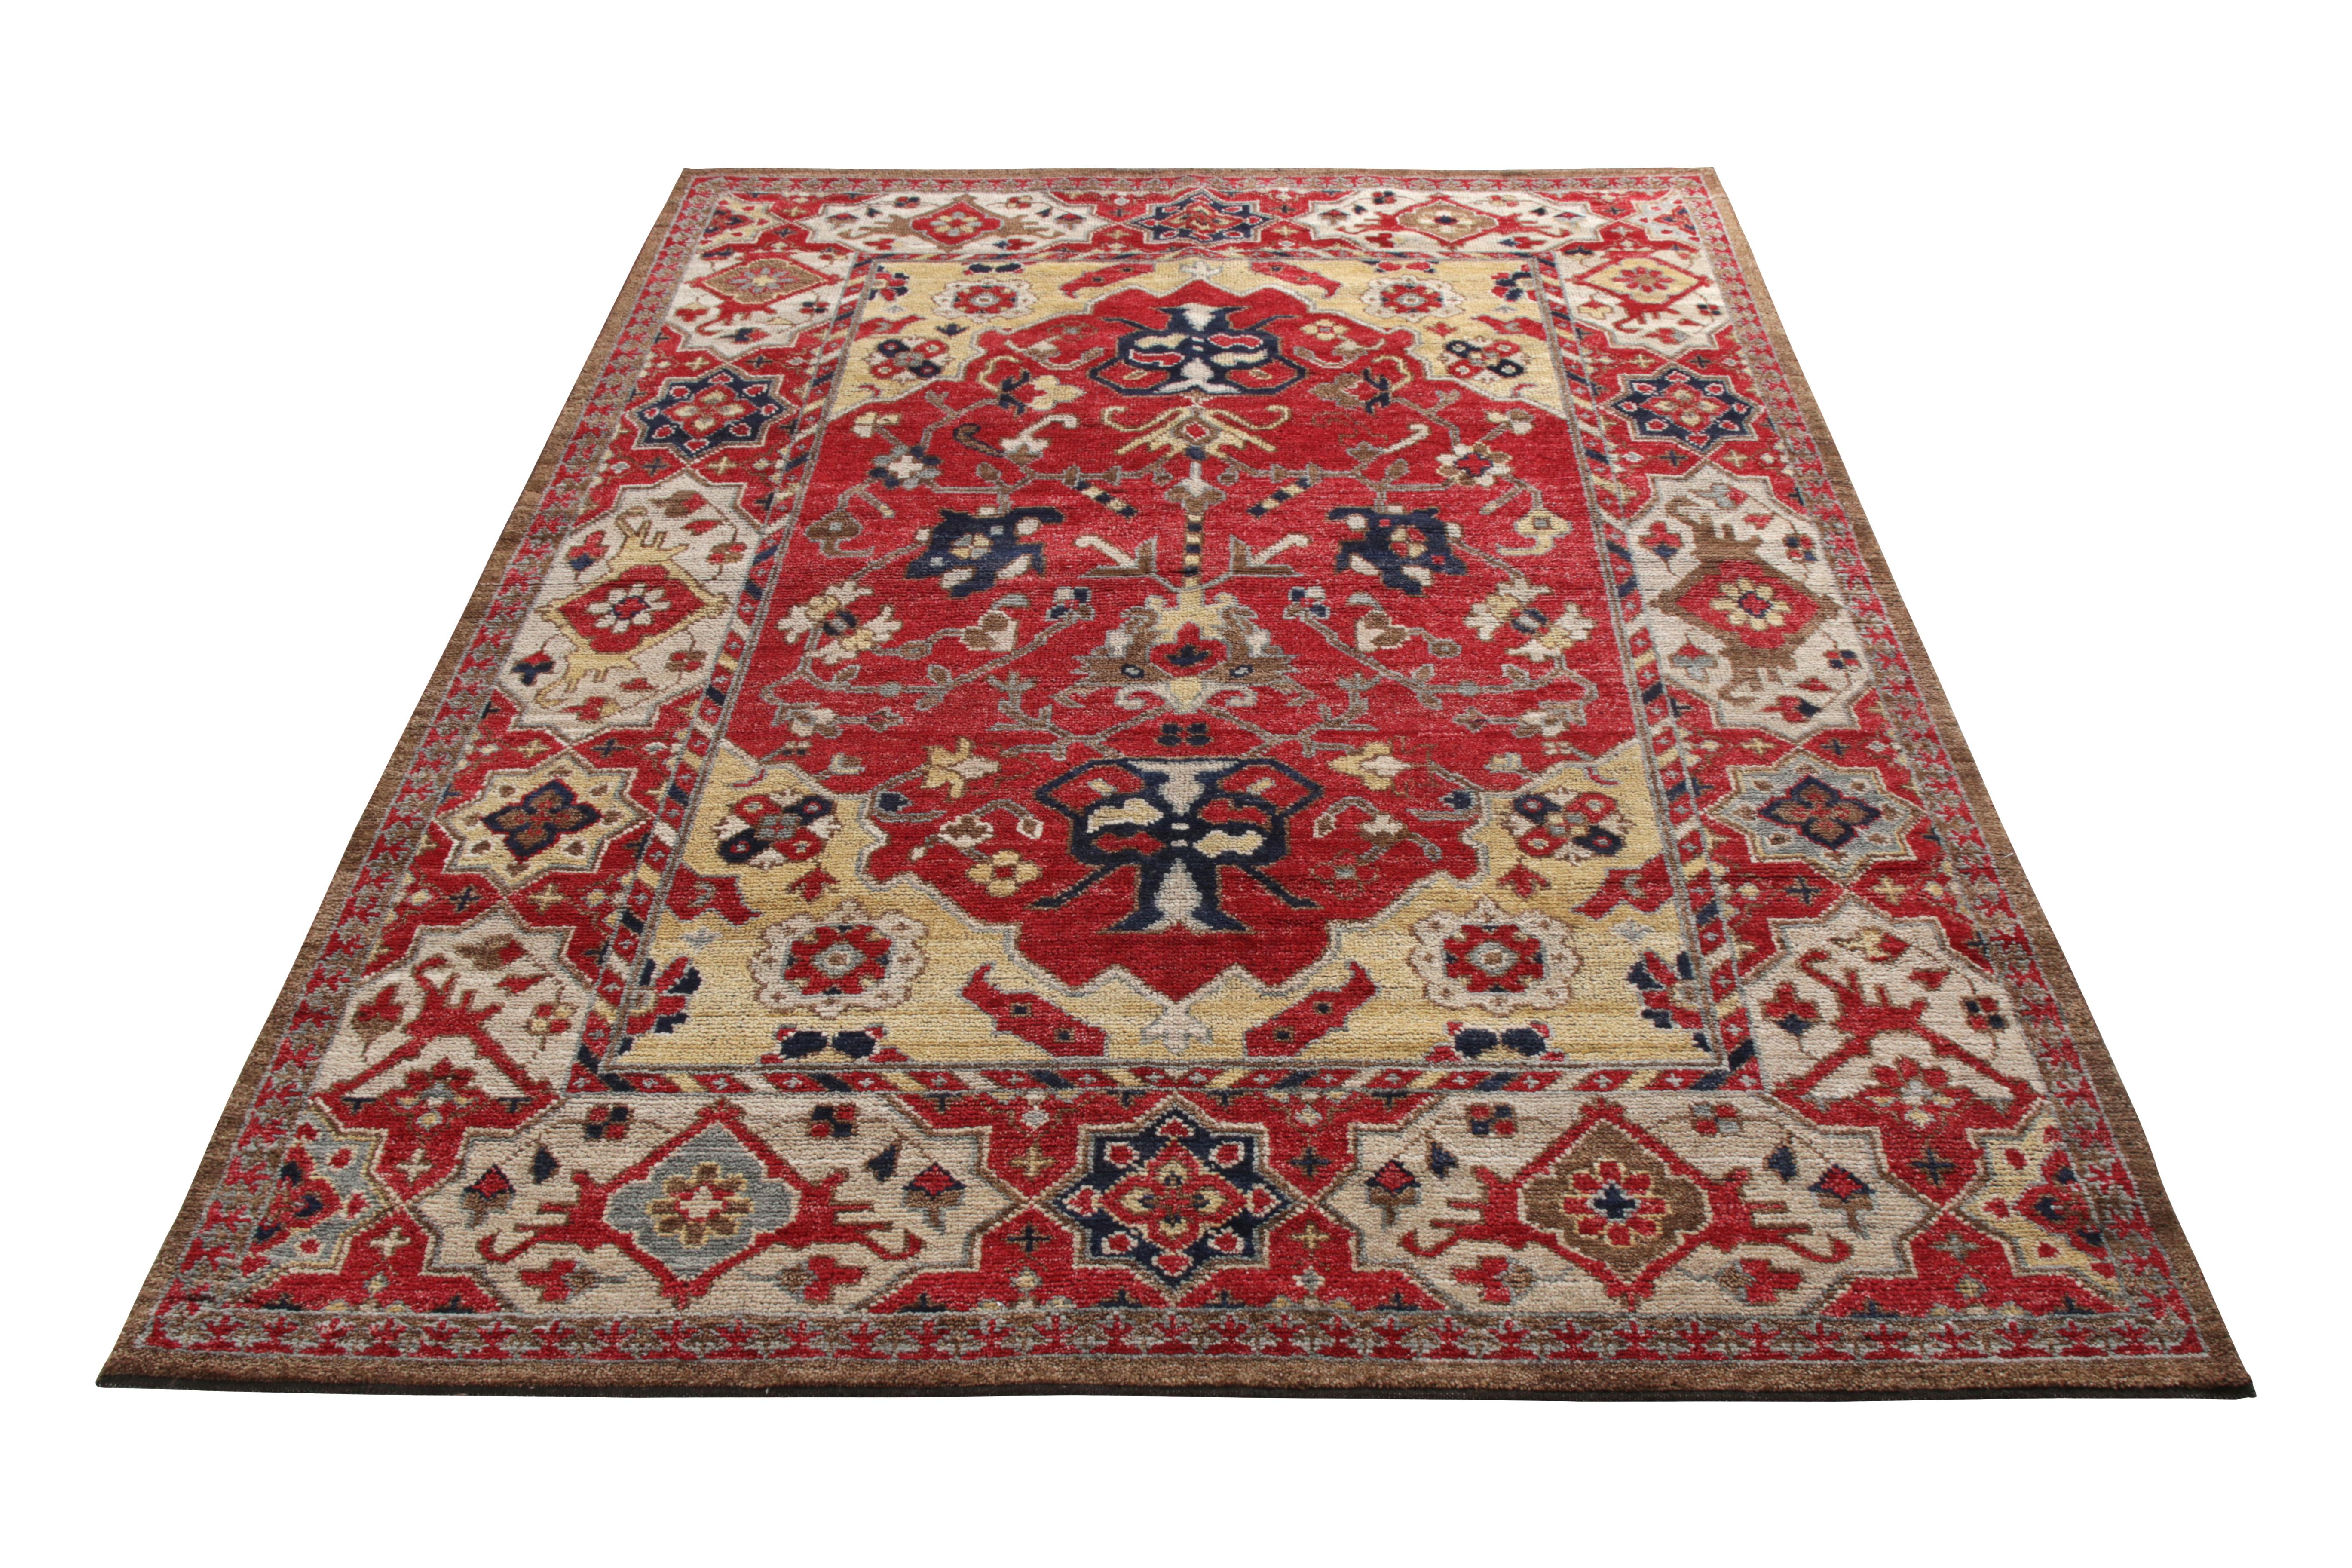 A 6x8 ode to celebrated transitional rug styles in hand-knotted wool, from Rug & Kilim’s Burano Collection. 
Rich red complemented by beige-brown and blue accents throughout a sophisticated, classic array of geometric-floral motifs in beautiful